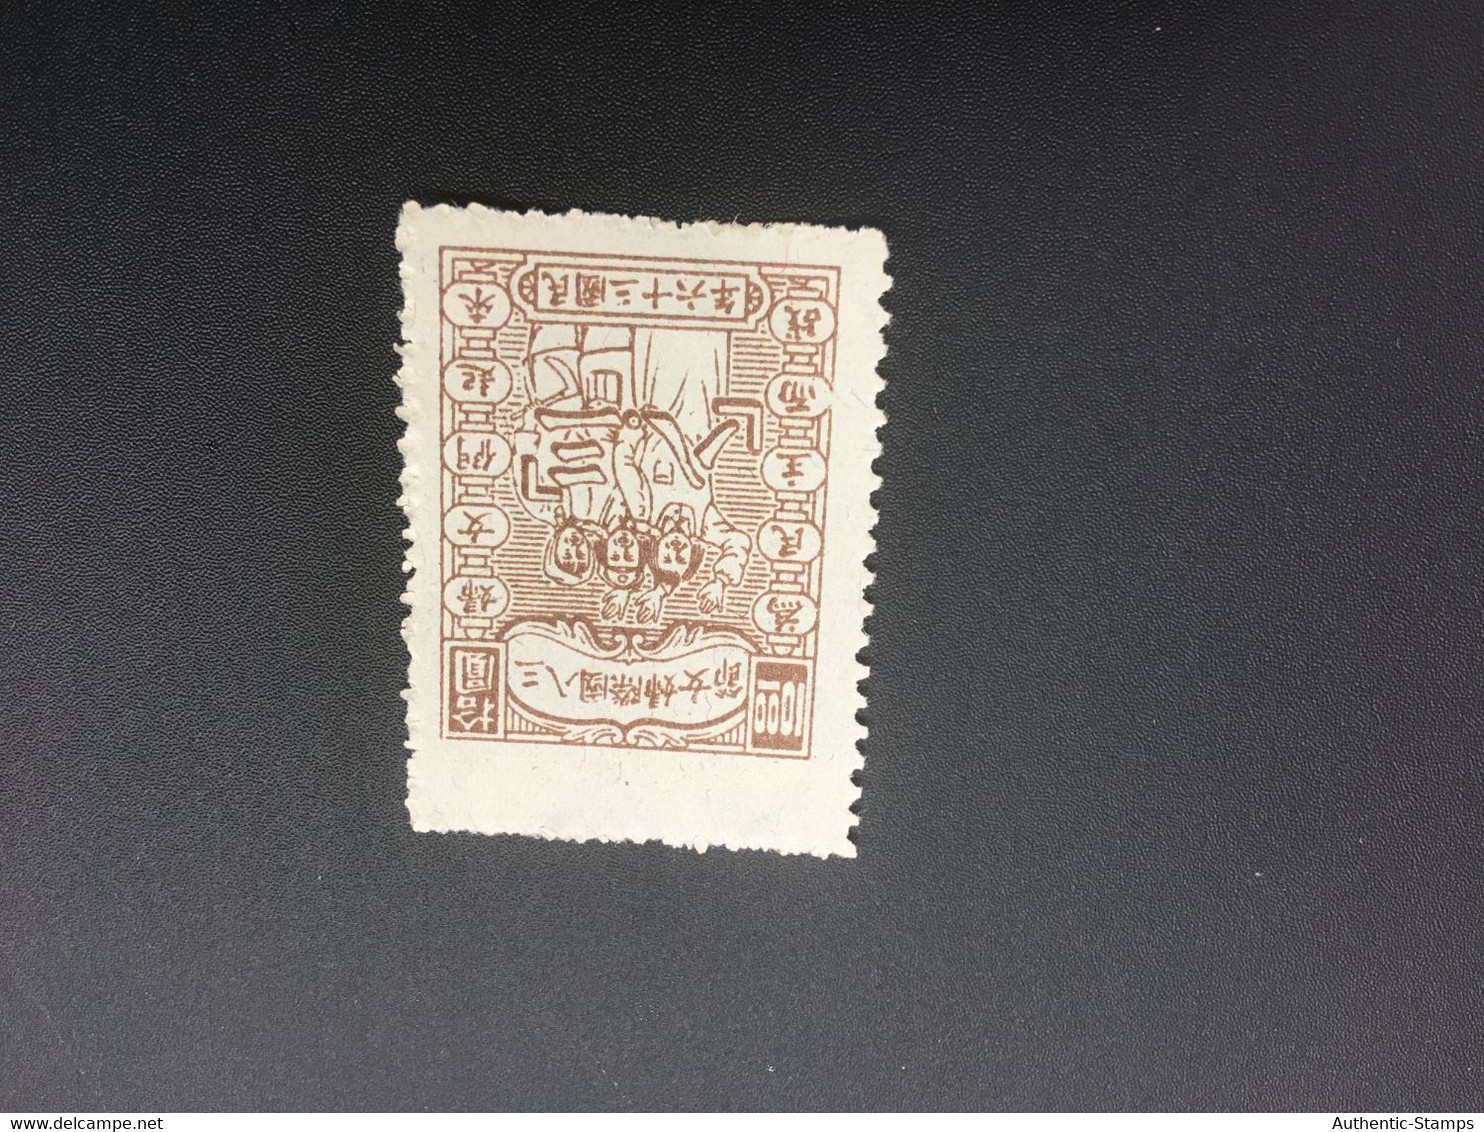 CHINA STAMP, UnUSED, TIMBRO, STEMPEL, CINA, CHINE, LIST 6159 - North-Eastern 1946-48